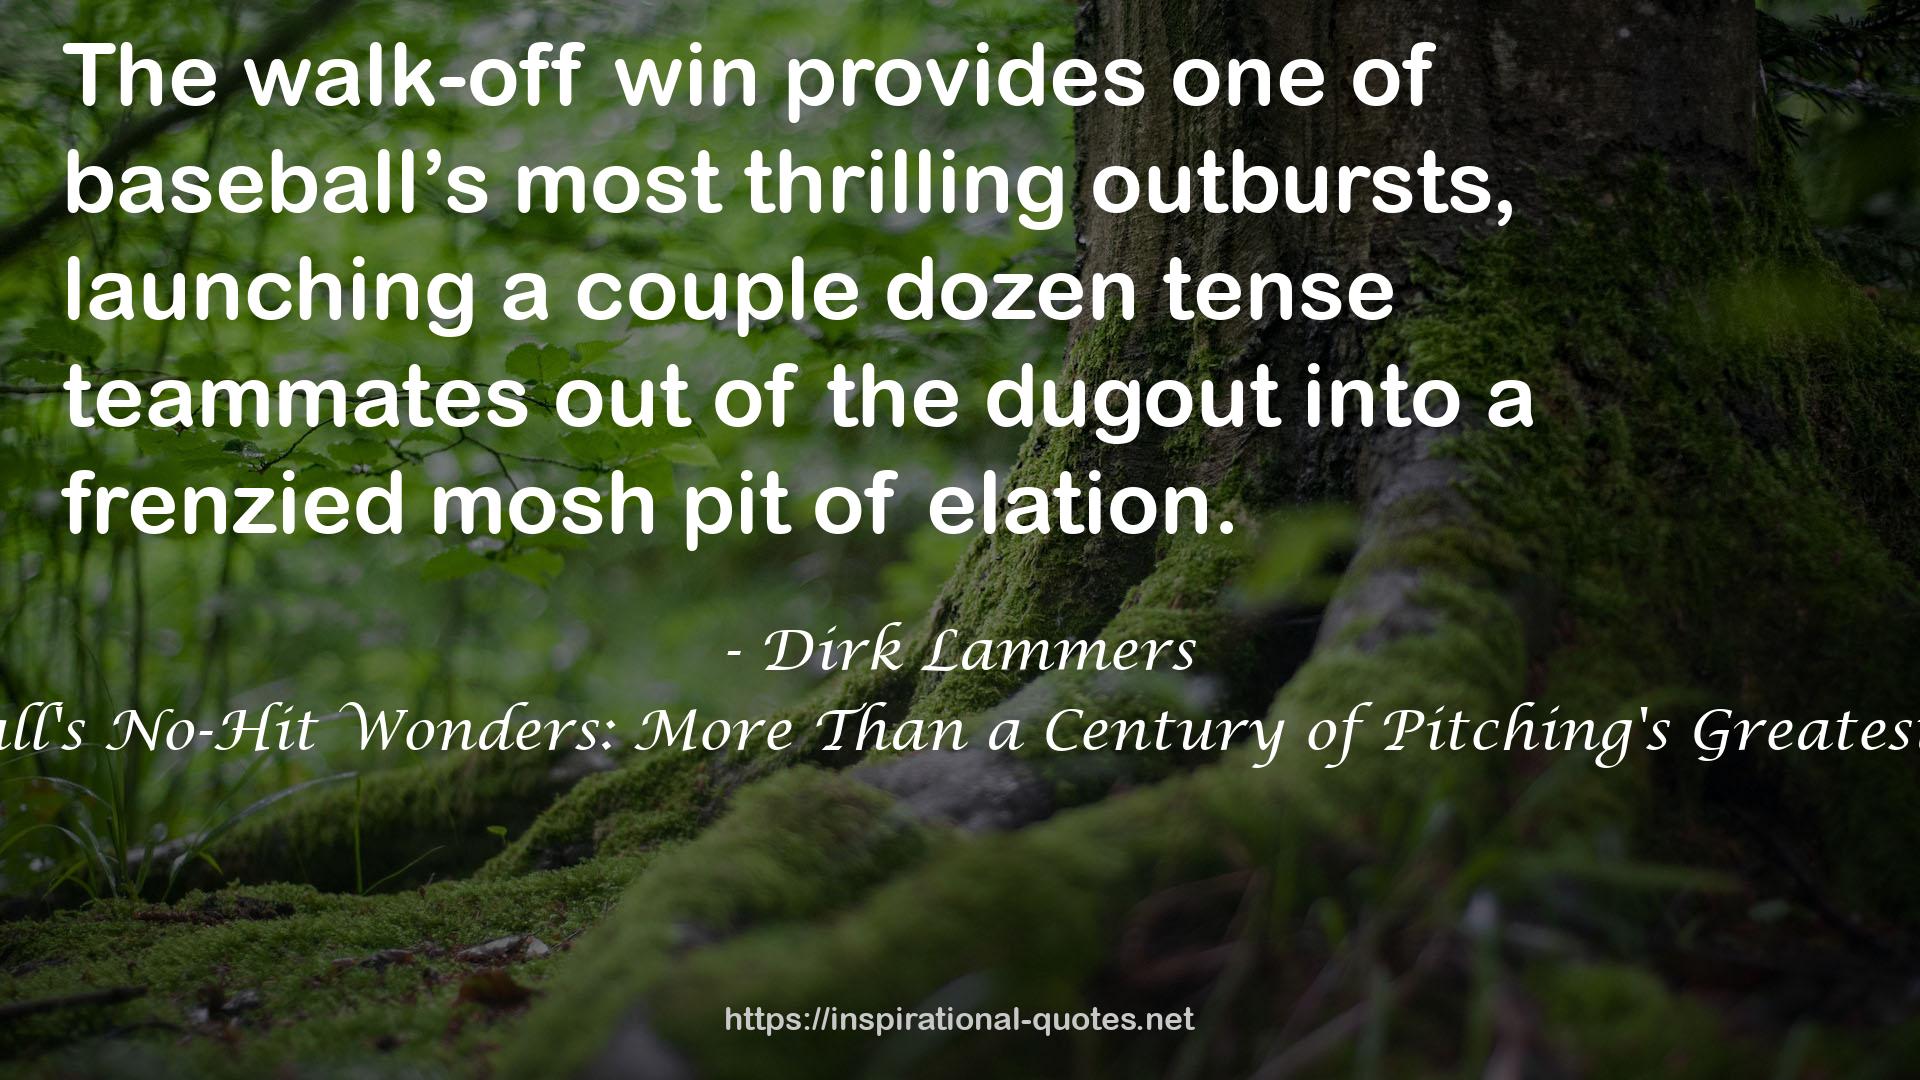 Baseball's No-Hit Wonders: More Than a Century of Pitching's Greatest Feats QUOTES